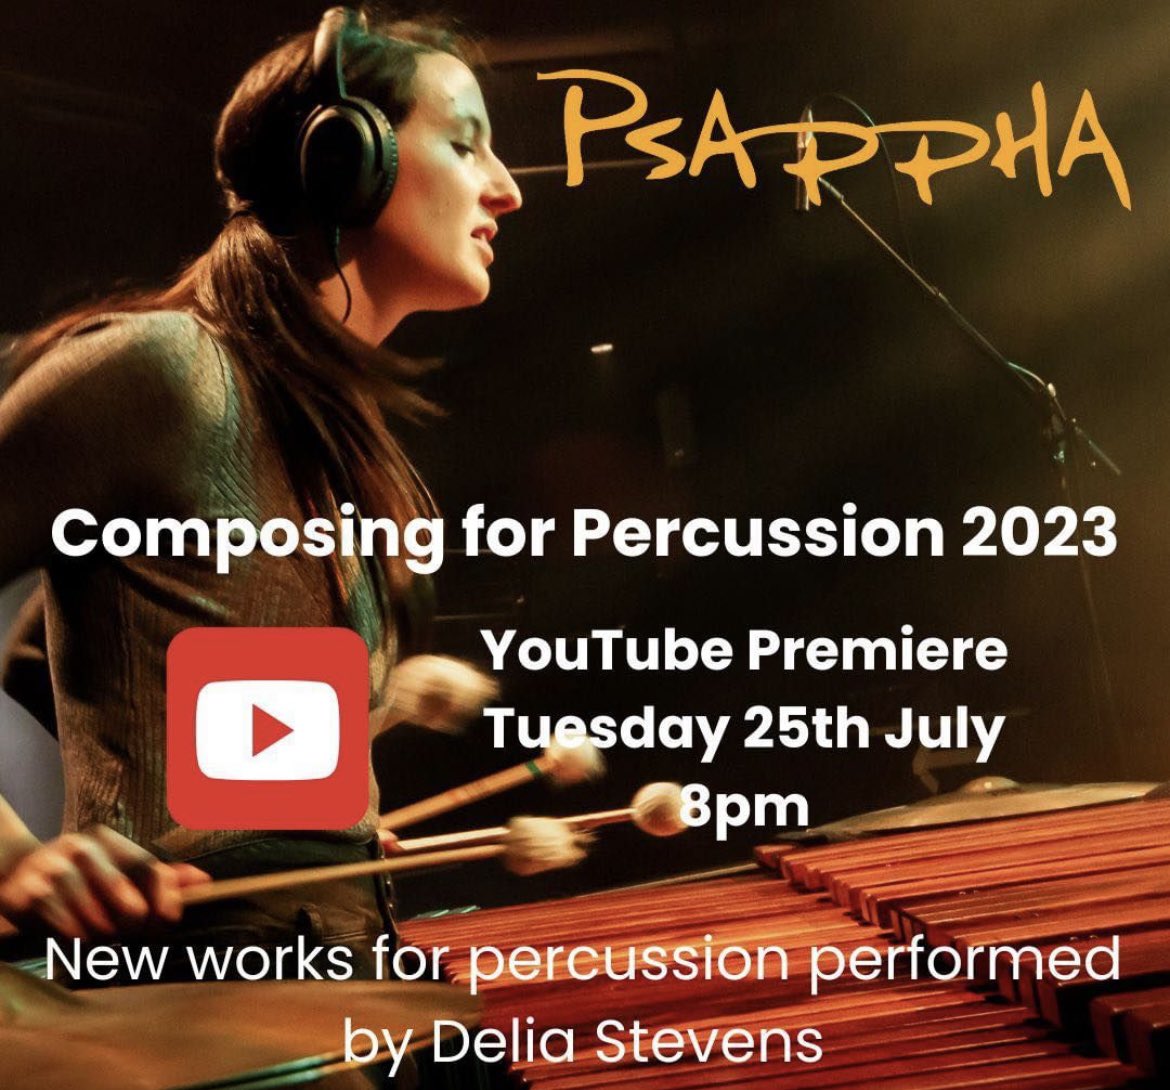 🗓️ Save the date! One week to go until the YouTube premiere of our Composing for Percussion films, from composers Chris McCormack, Crystalla Serghiou, Jamie Elless, John Rivera Pico, Josh Kaye and Ollie Hawker, performed by Delia Stevens. Link in bio!